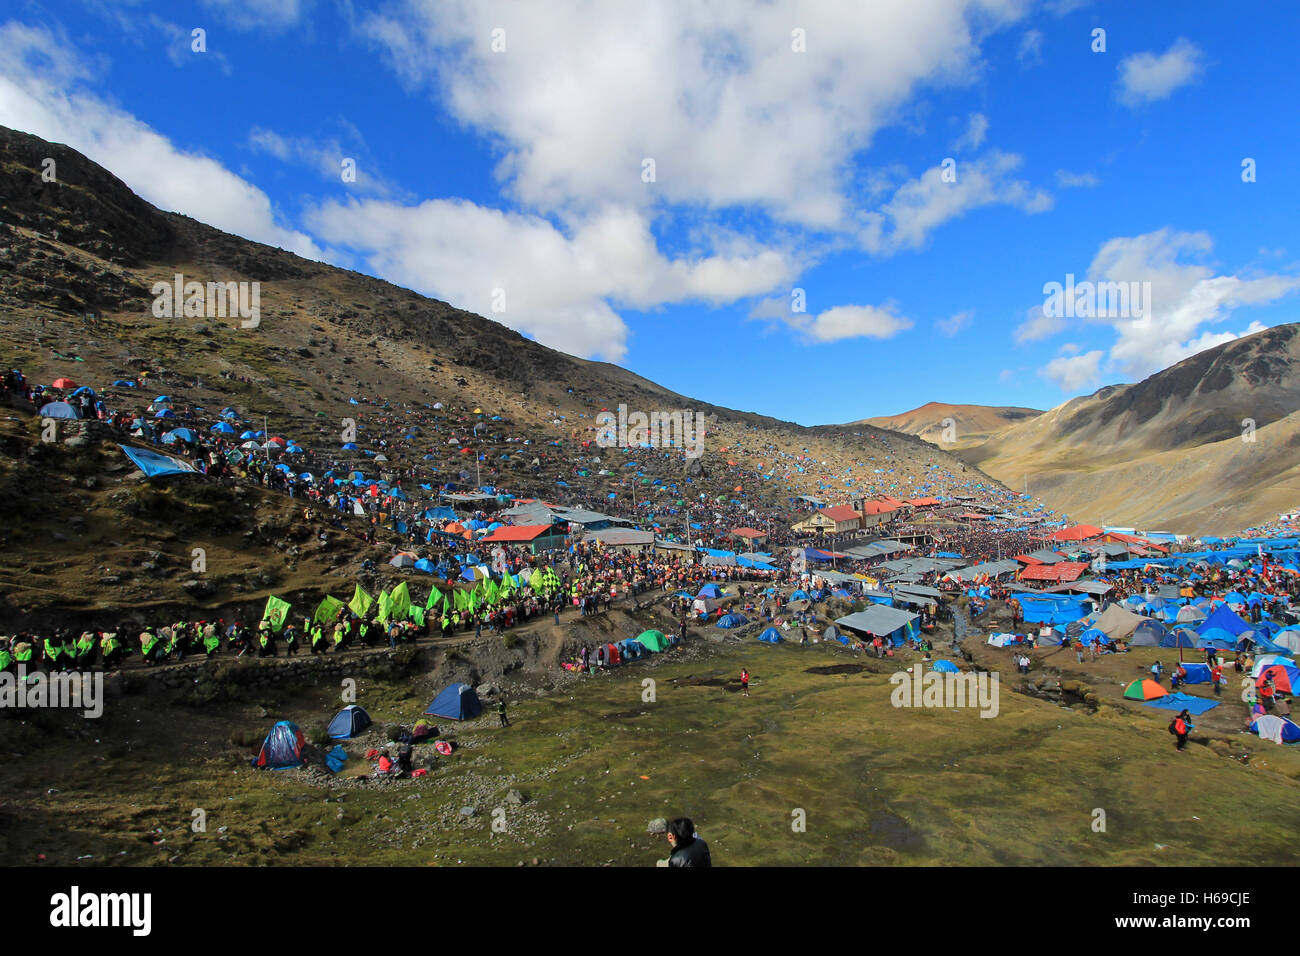 Overview of Quyllurit'i inca festival in the peruvian andes near ausangate mountain. Stock Photo